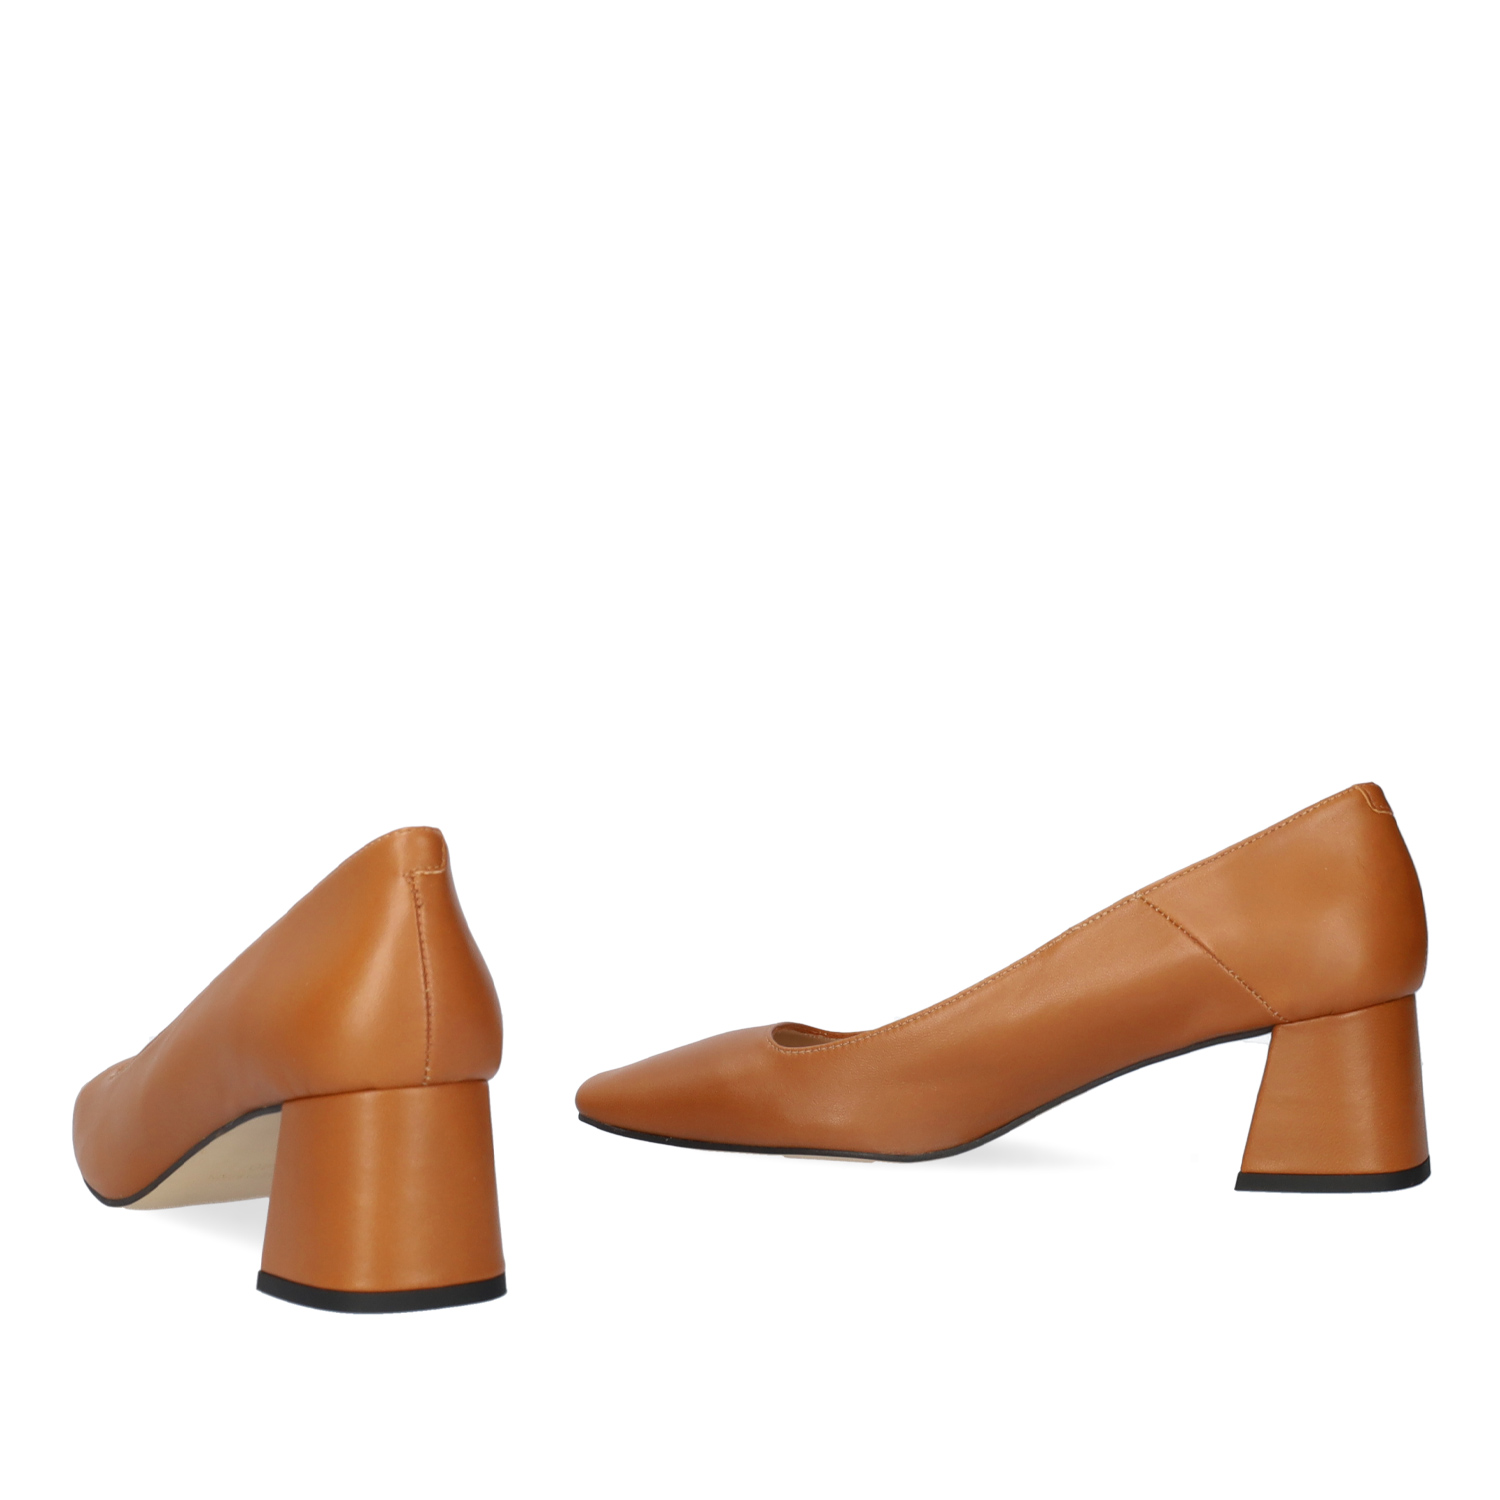 Heeled shoe in brown leather 